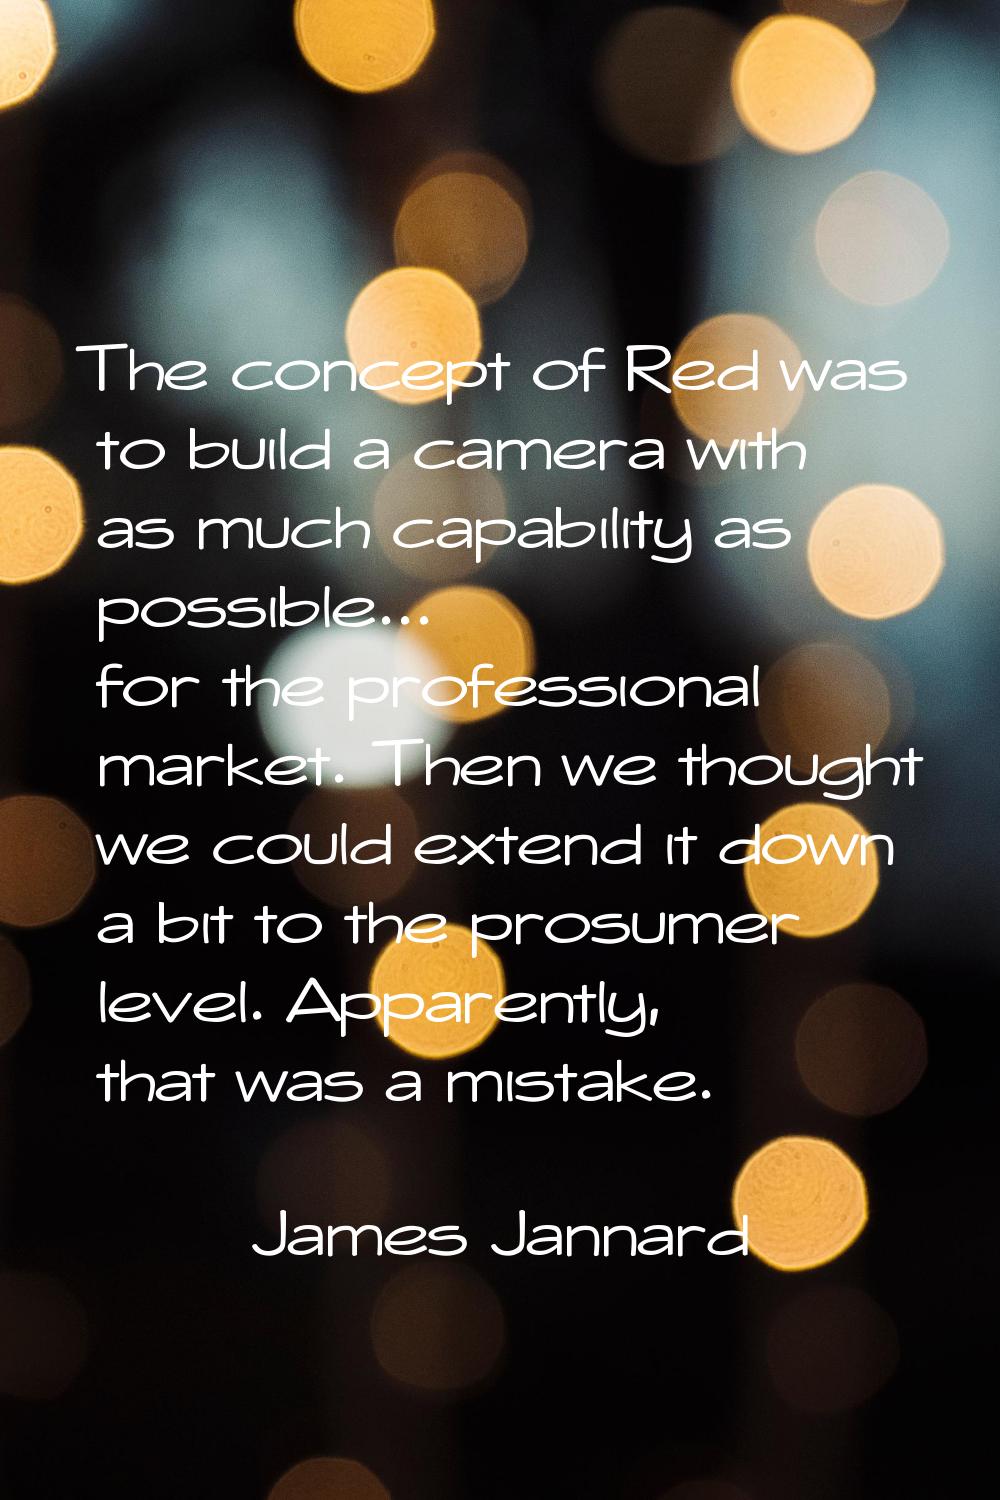 The concept of Red was to build a camera with as much capability as possible... for the professiona